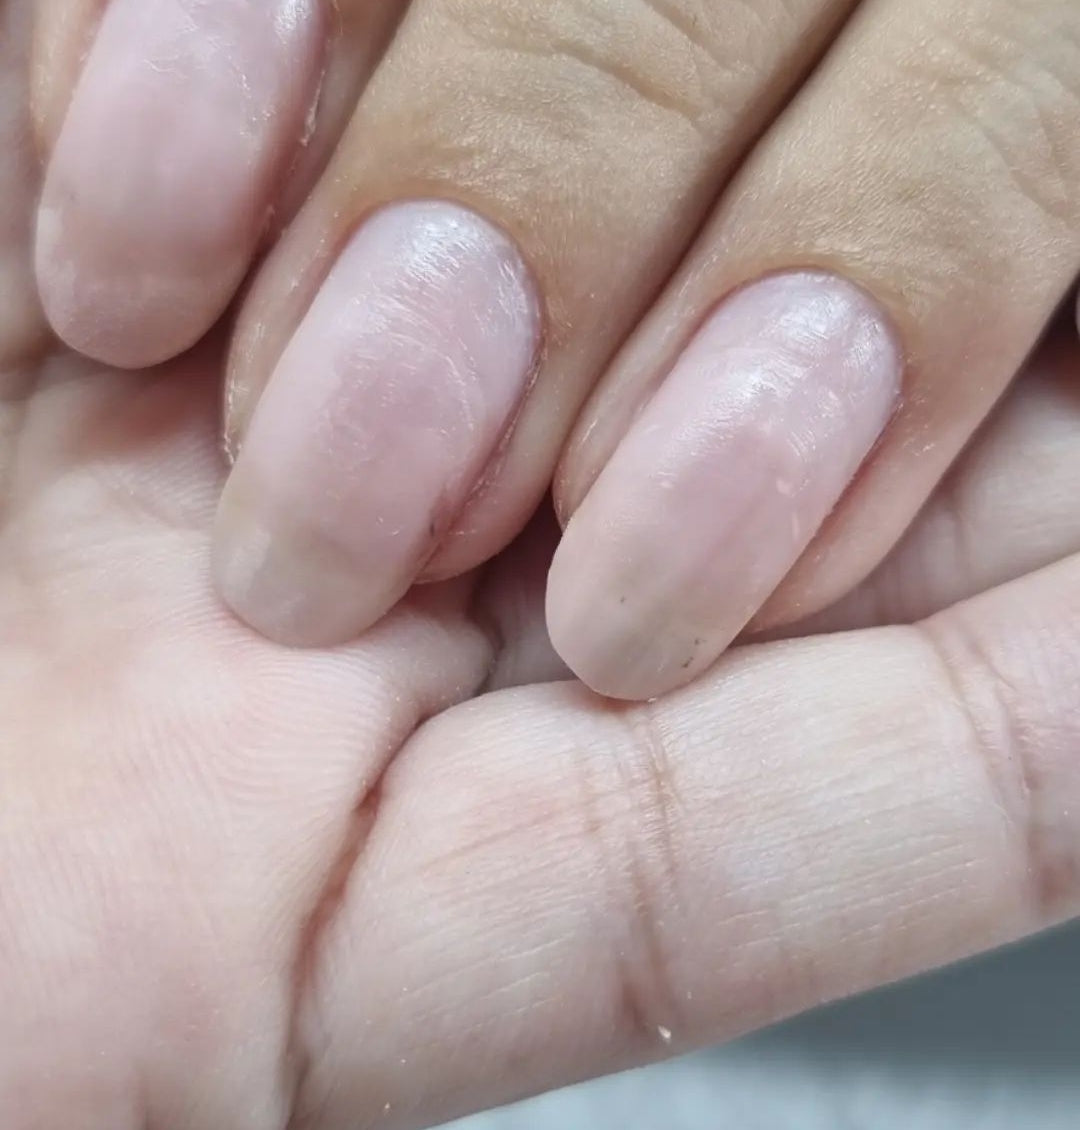 Online training Perfect manicure VSP + REINFORCEMENT + REMOVAL